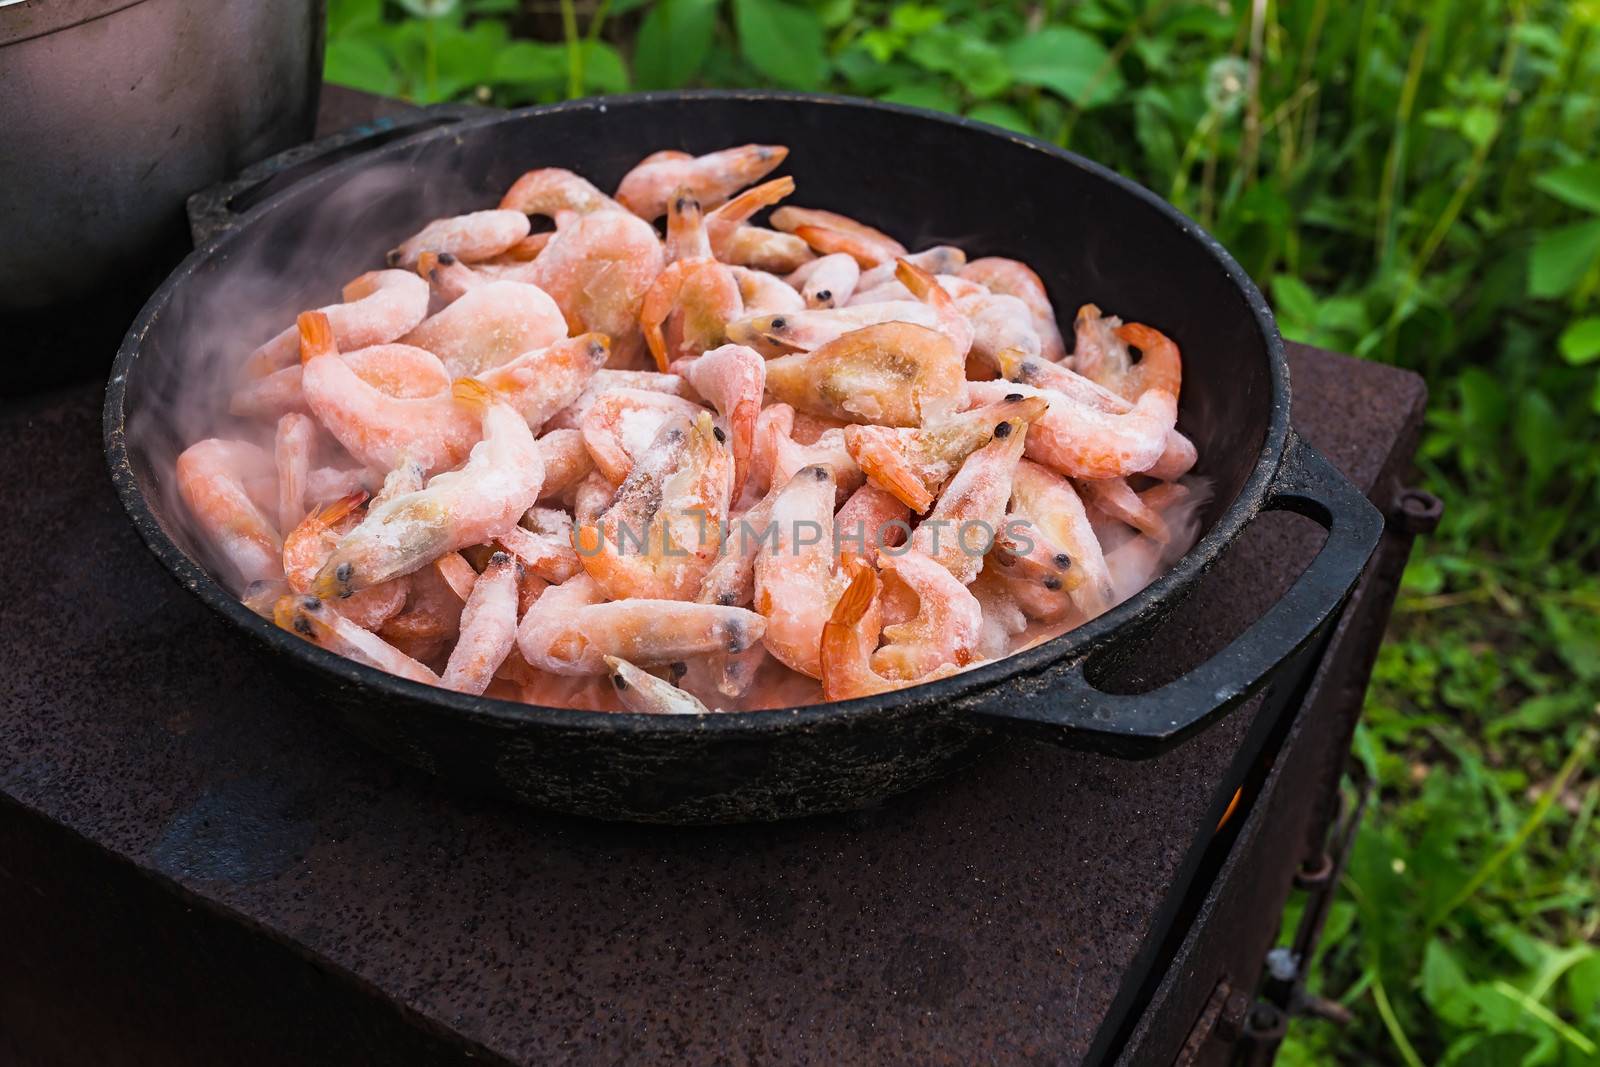 Cooking frozen shrimp in an old frying pan